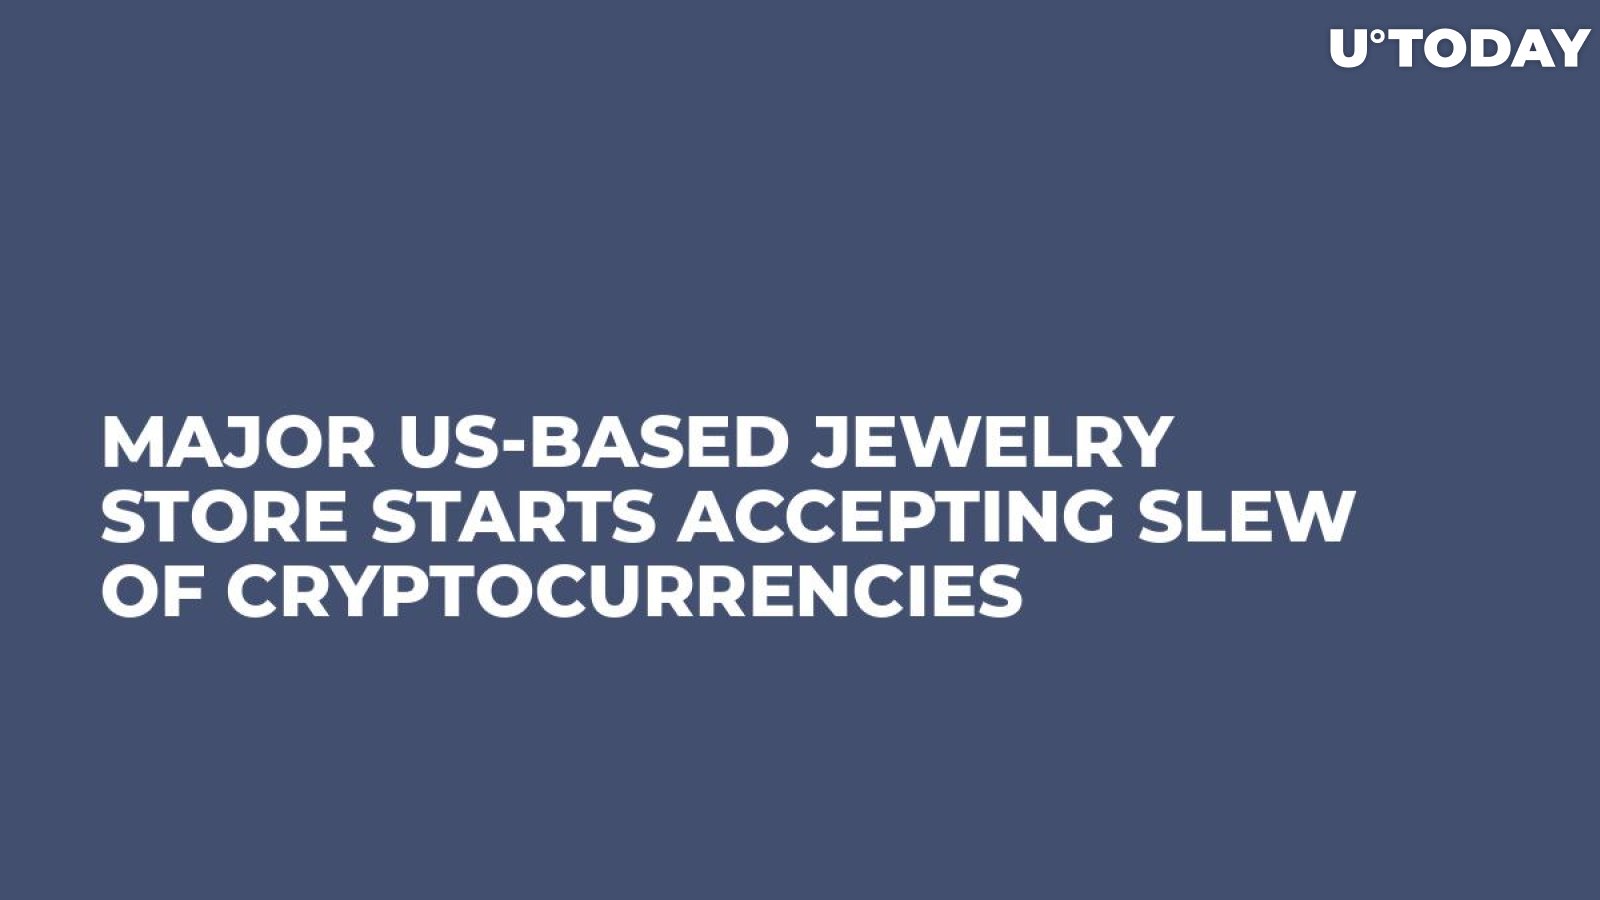 Major US-Based Jewelry Store Starts Accepting Slew of Cryptocurrencies 